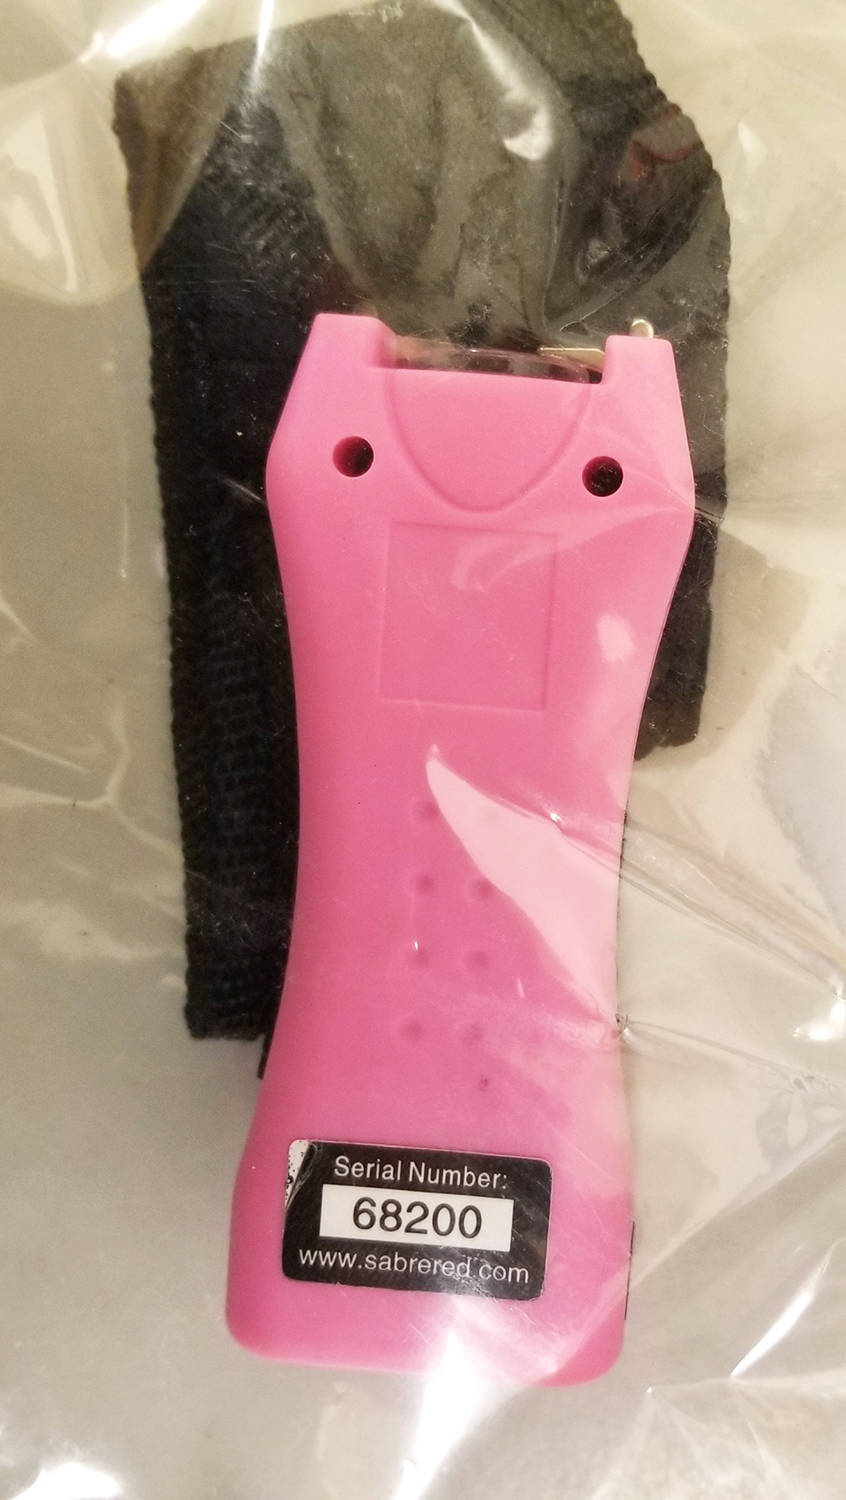 Along with a sawed-off firearm seized was this hand-held stun gun that Wetaskiwin RCMP located. Four Wetaskiwin residents were charged because of the investigation. RCMP photo